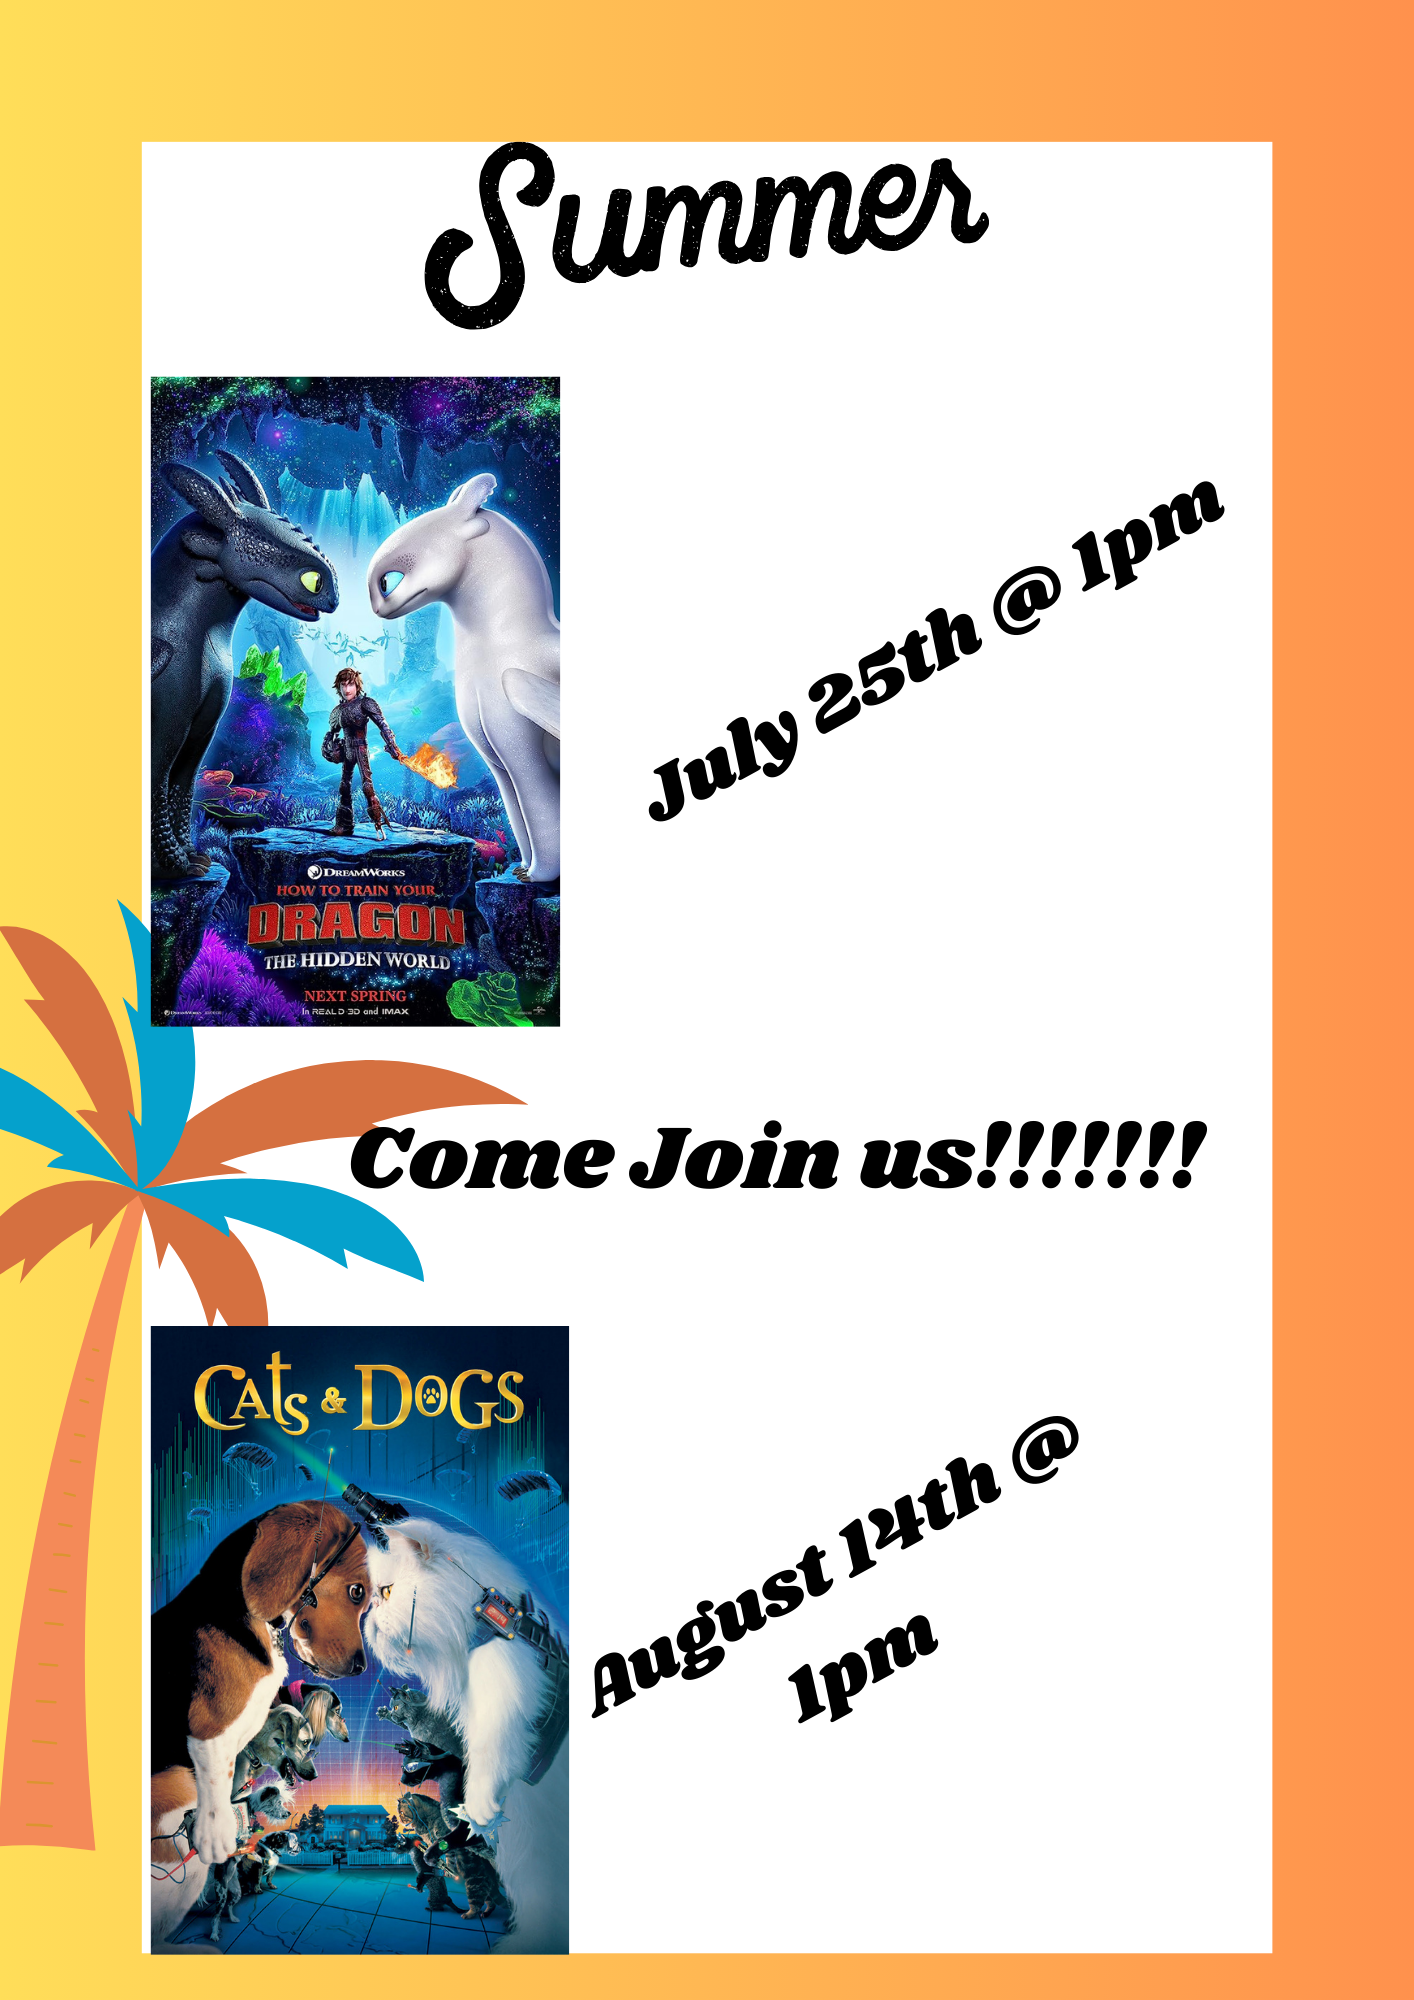 Summer movies. How to Train Your Dragon on July 25th at 1pm and Cats and Dogs on August 14th at 1pm.